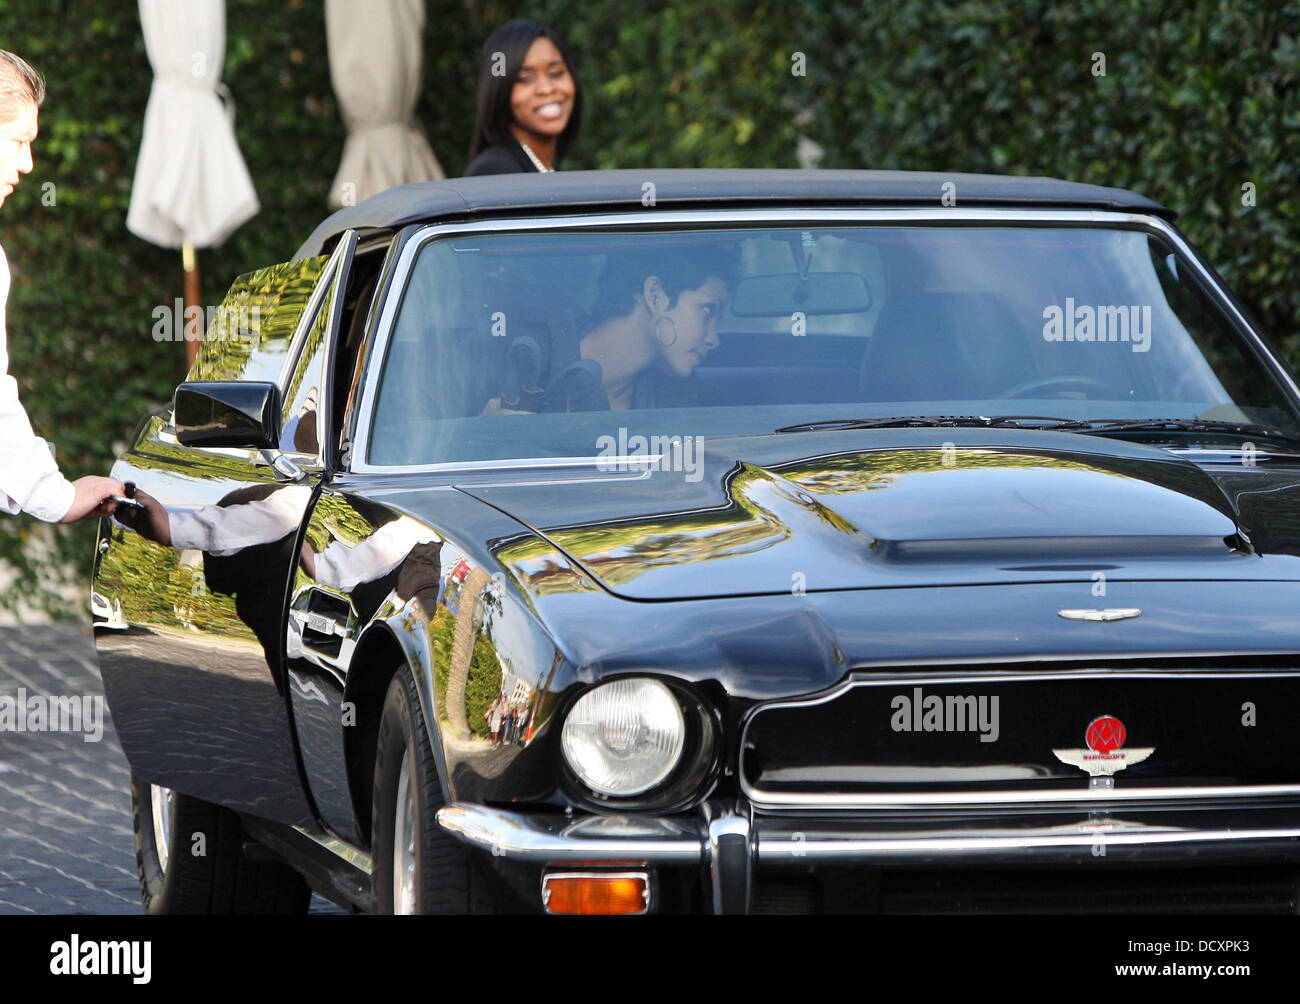 Halle Berry leaves in a black Aston Martin V8 Vantage Volante after having lunch in West Hollywood. Los Angeles, California - 29.12.11 Stock Photo